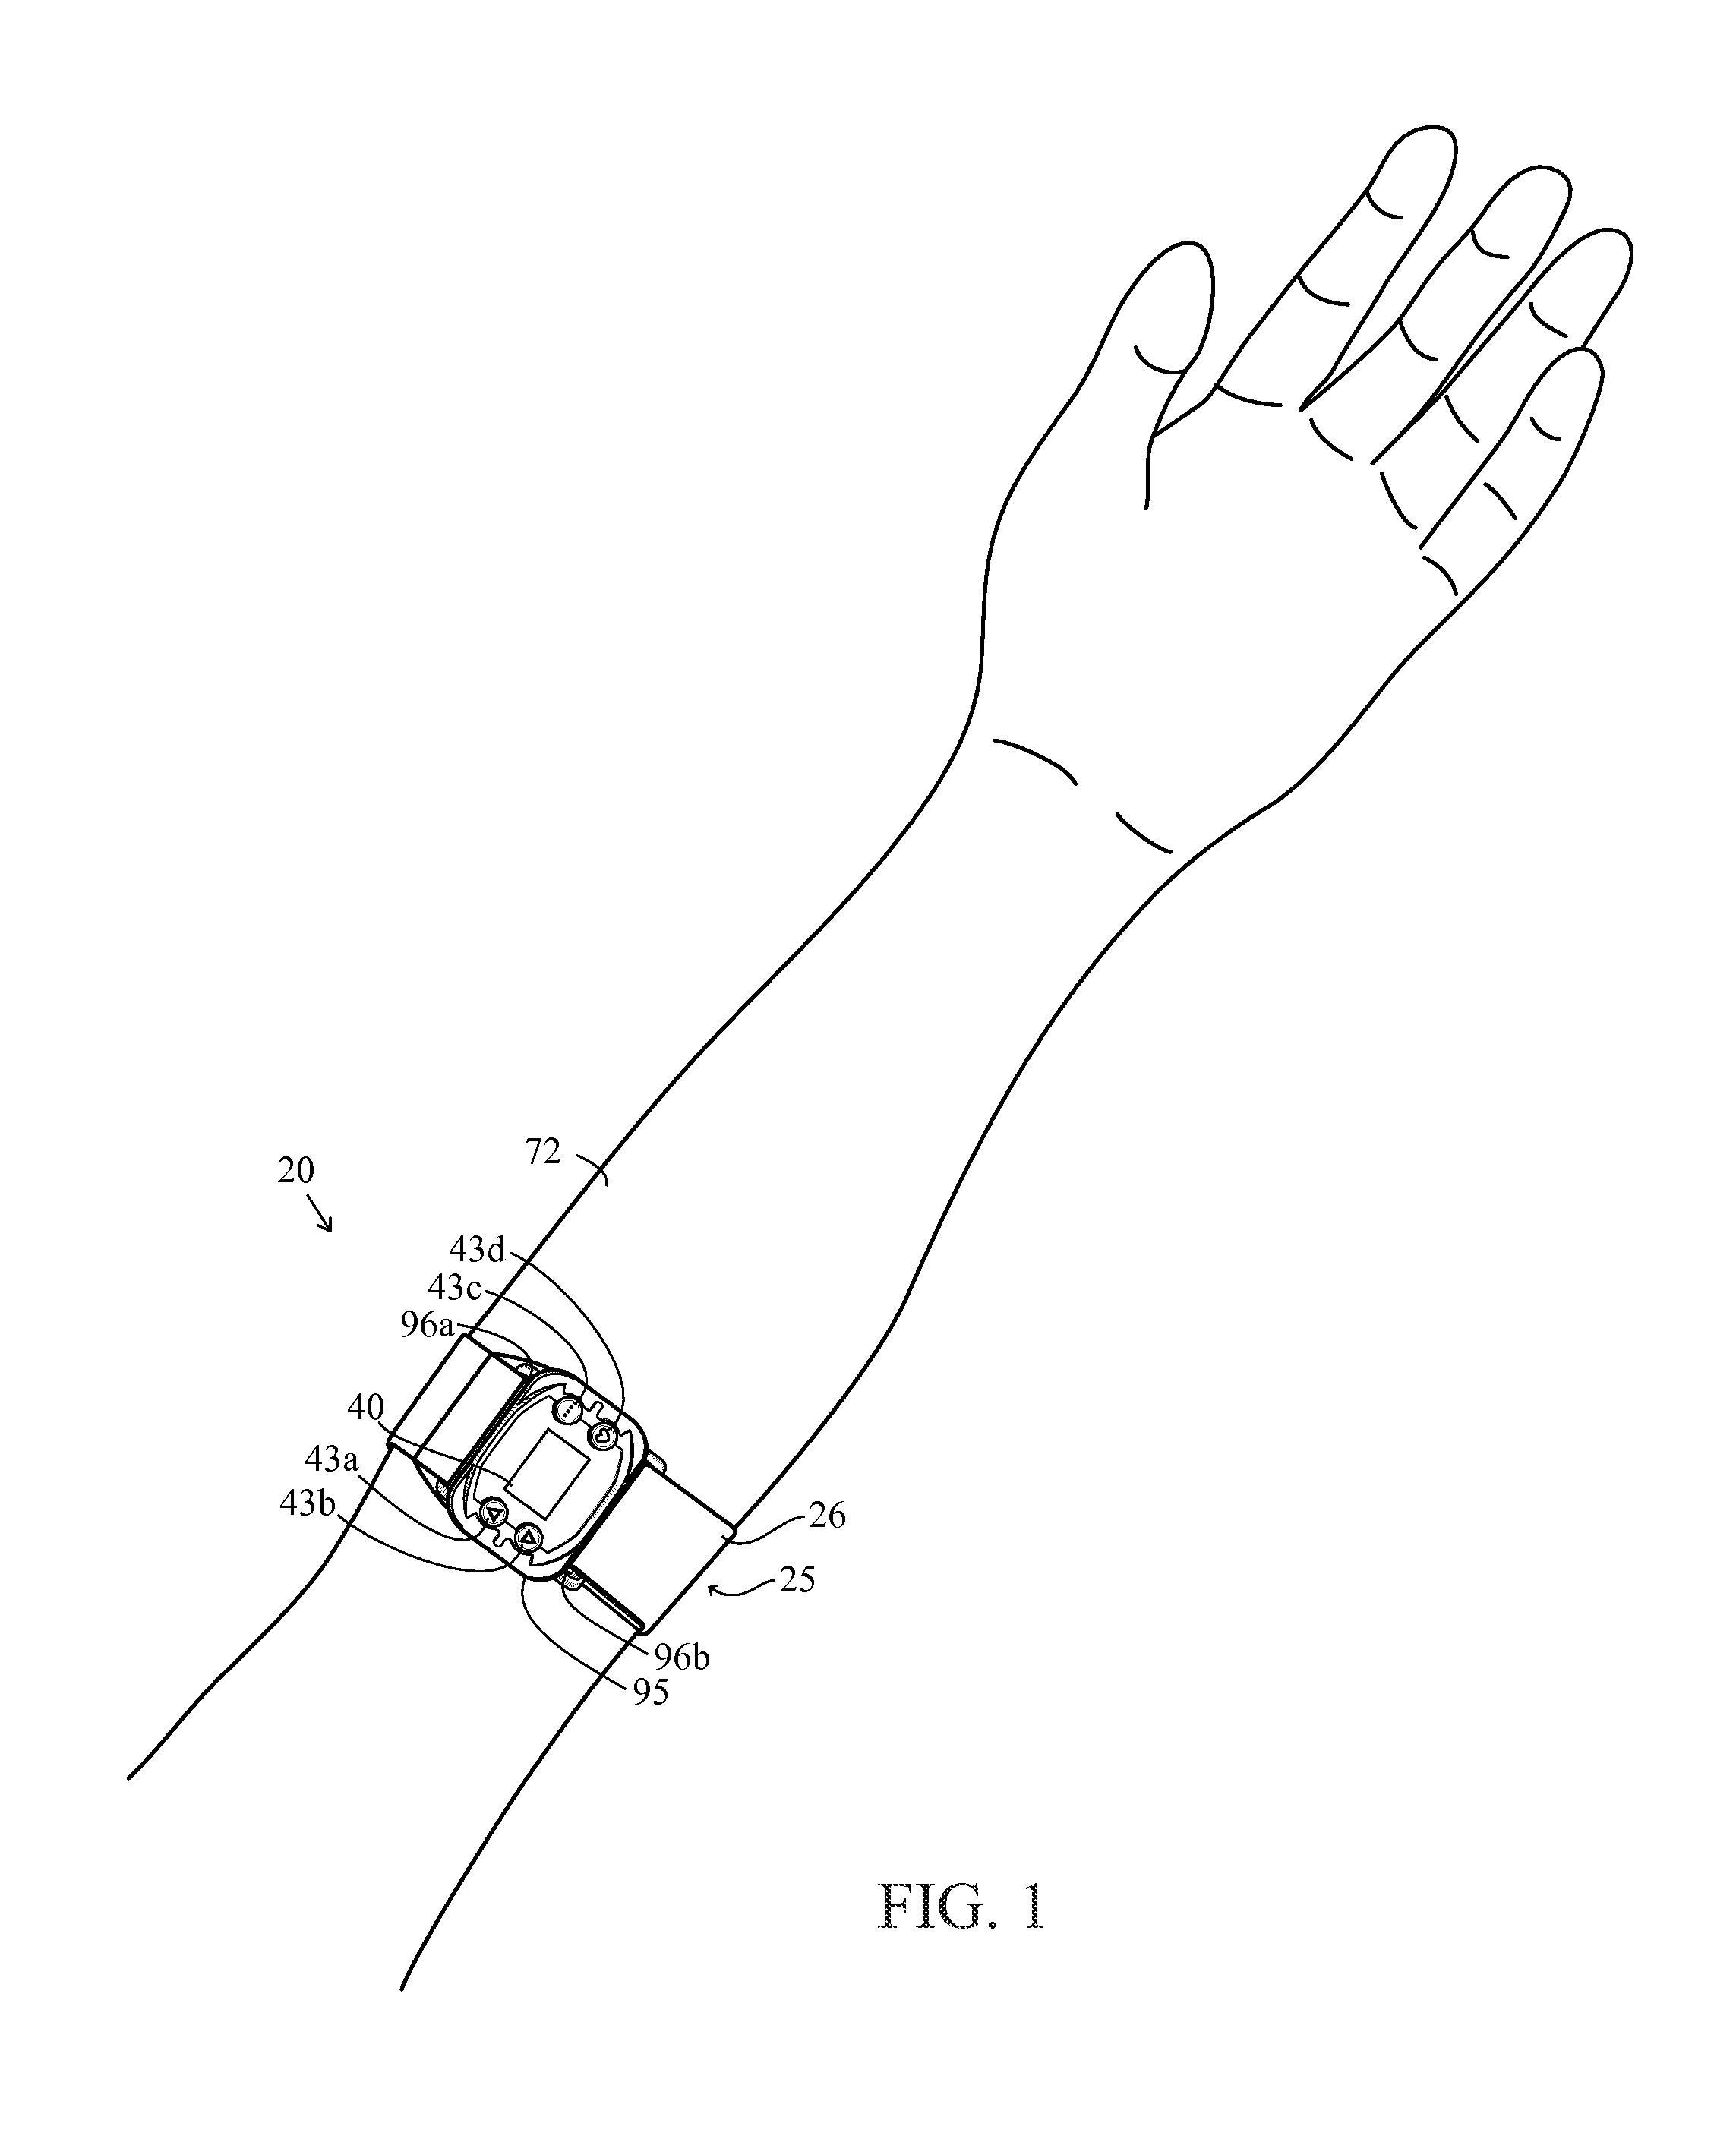 Monitoring device with a pedometer